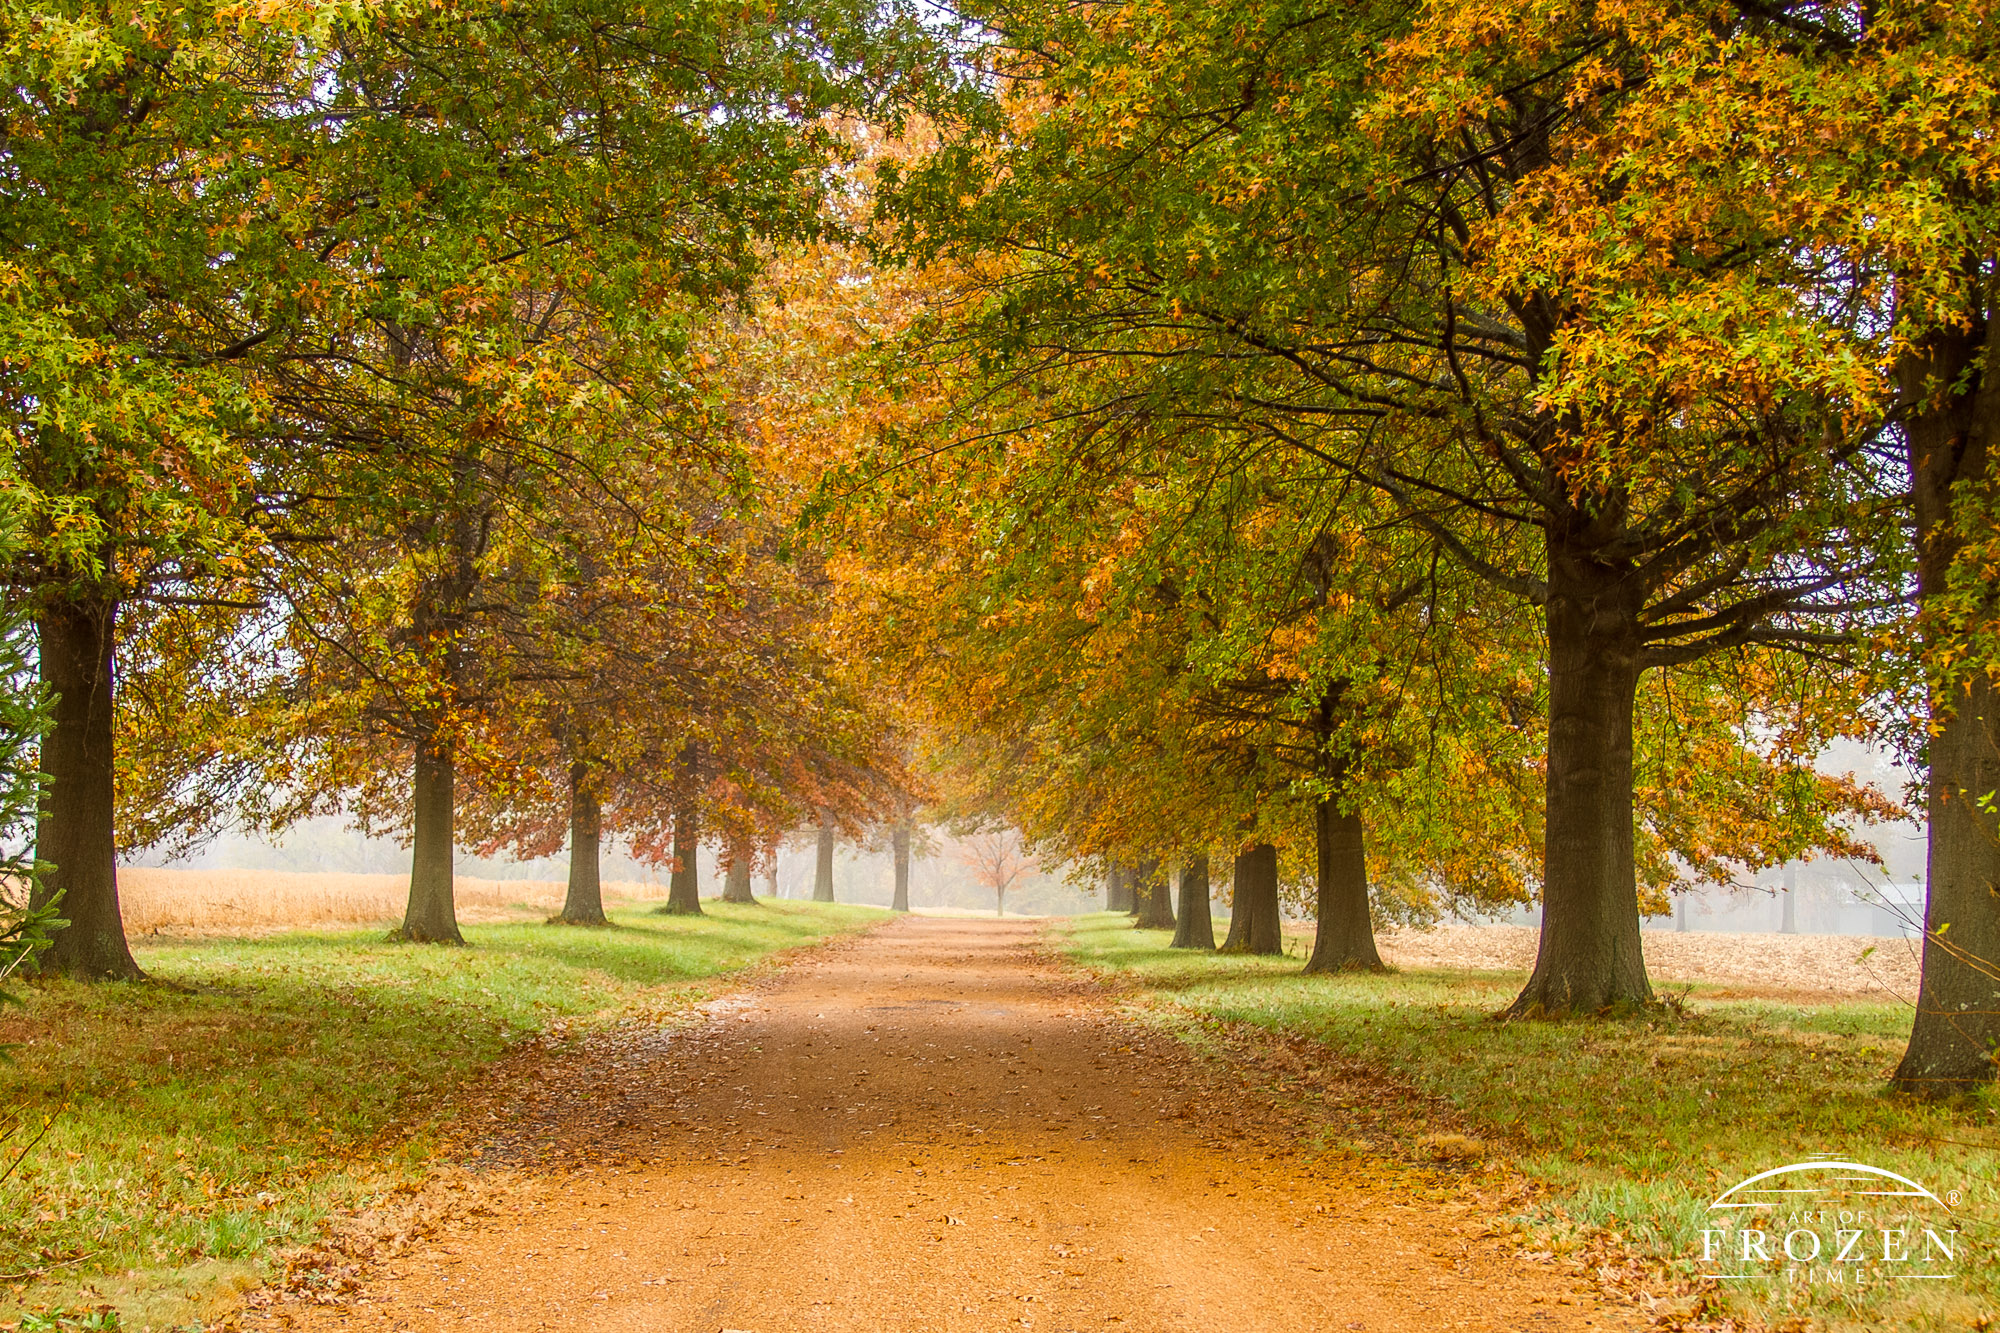 A gravel road leads the eye through this tree-lined pathway on a foggy autumn morning